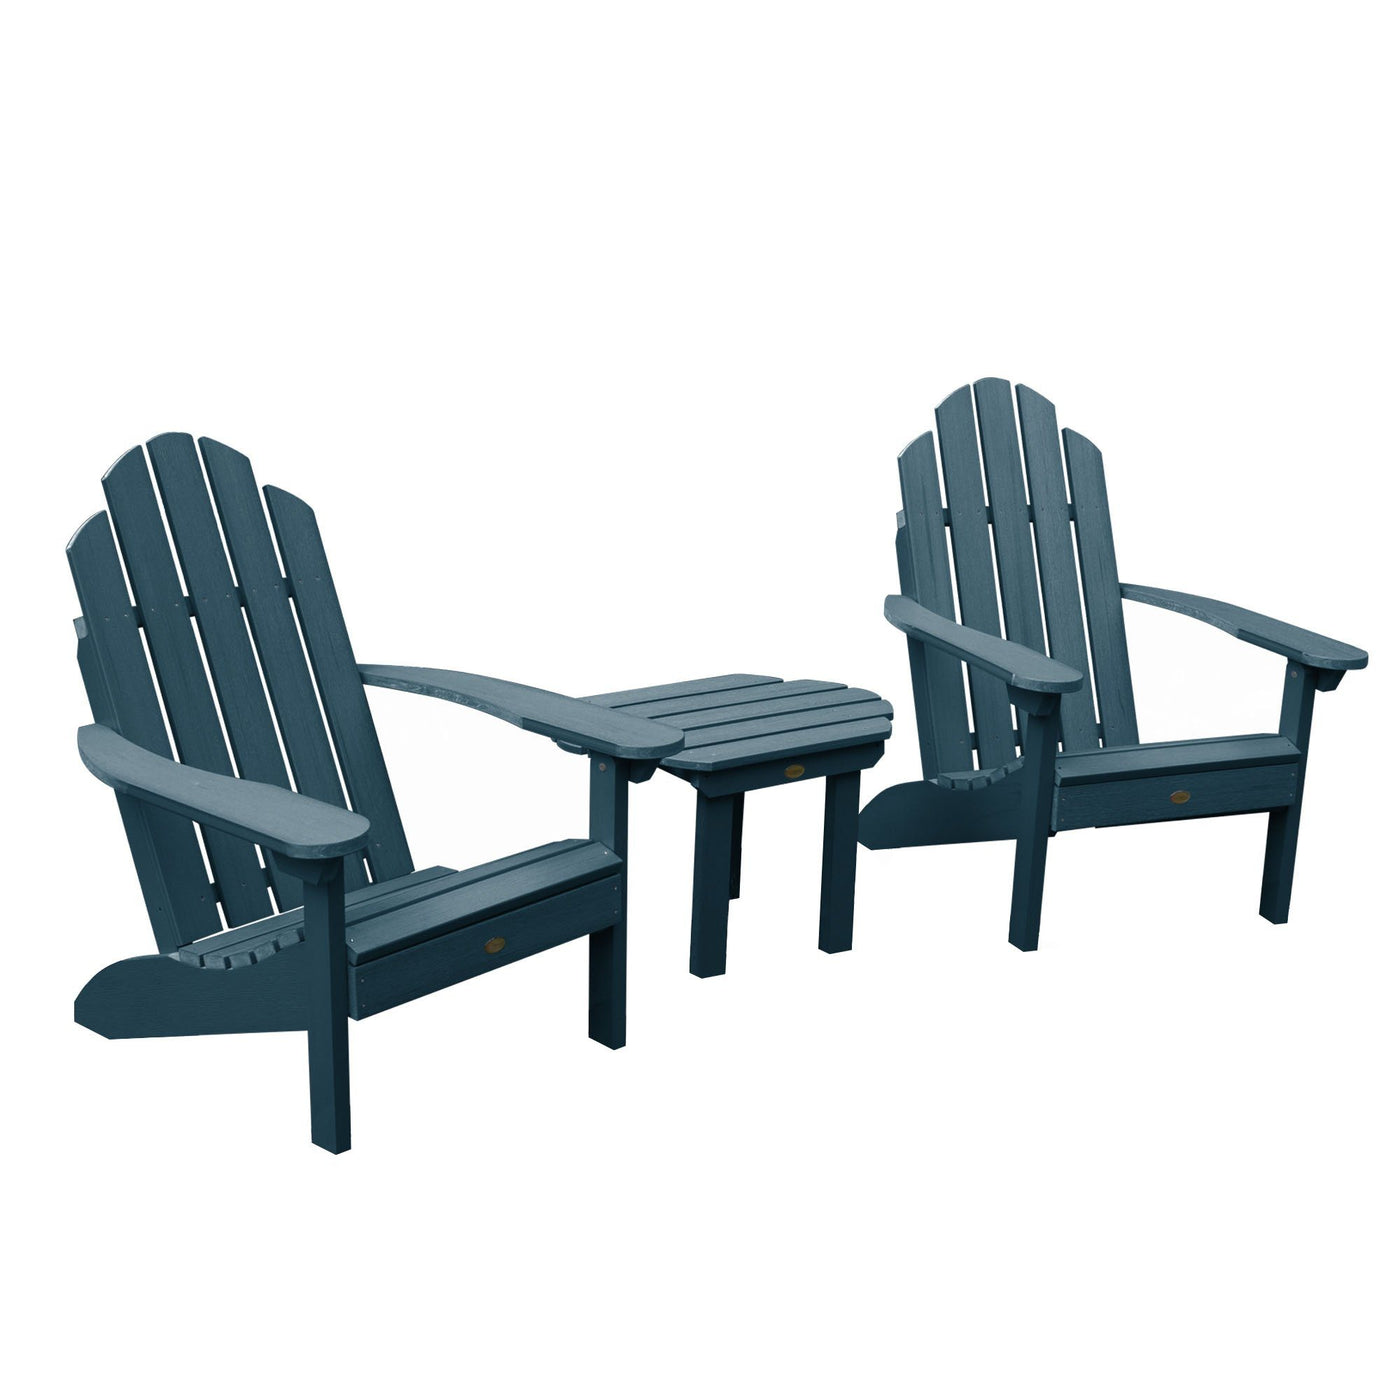 2 Classic Westport Adirondack Chairs with 1 Westport Side Table Highwood USA Nantucket Blue 